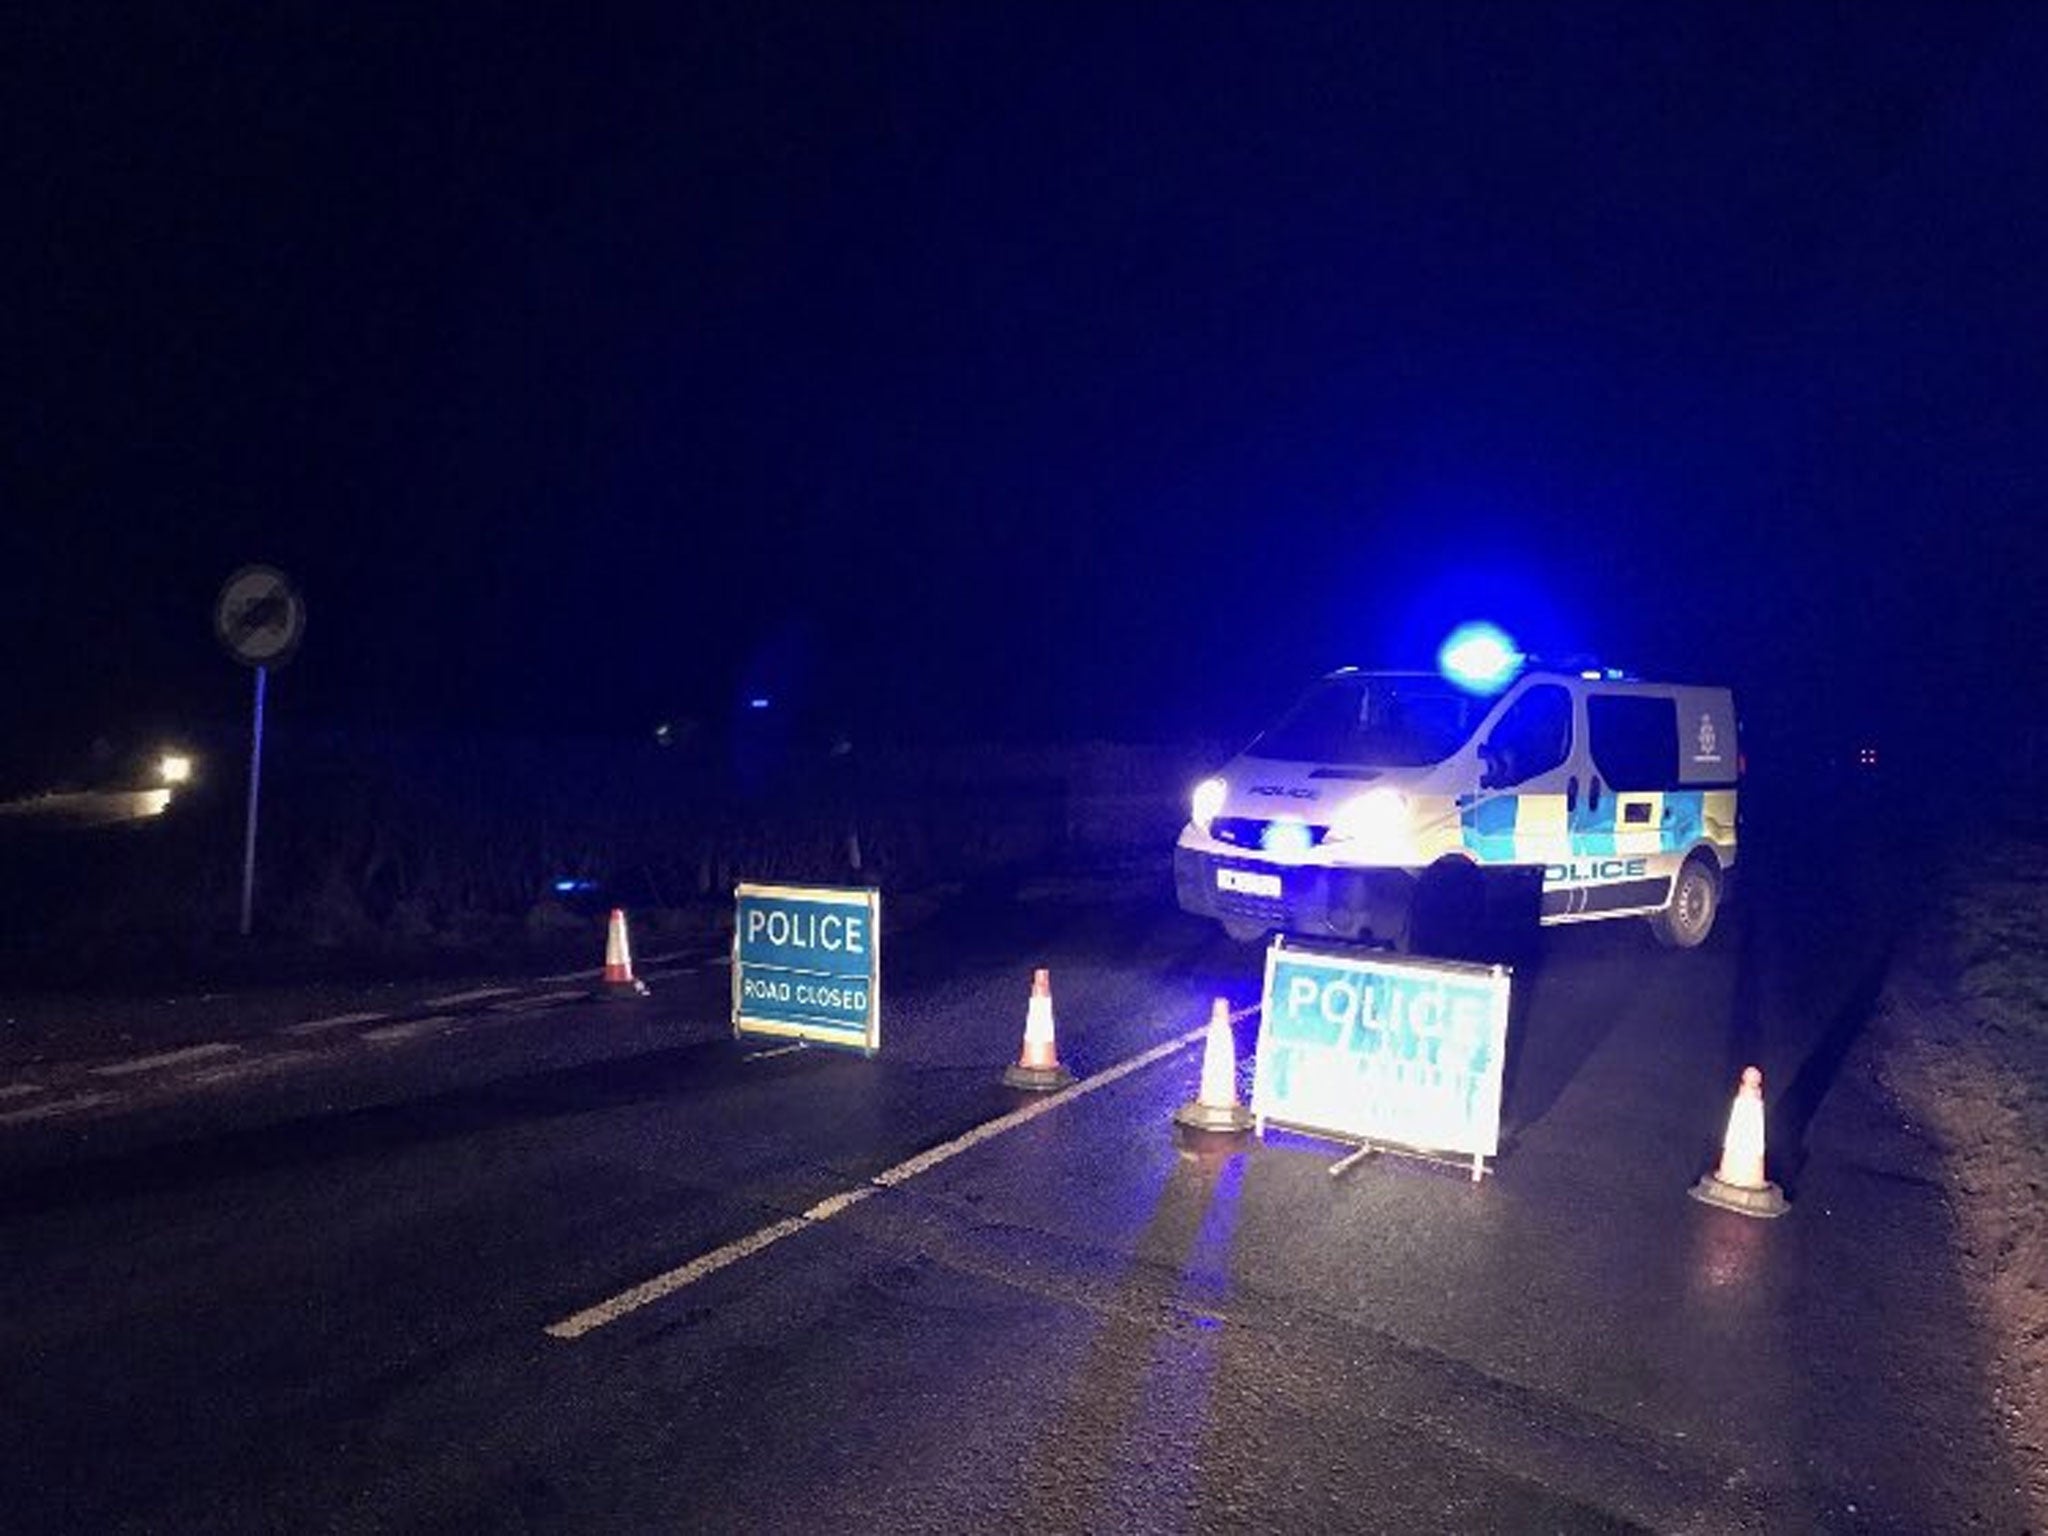 Firefighters and coastguard joined police officers in searching for the wreckage overnight